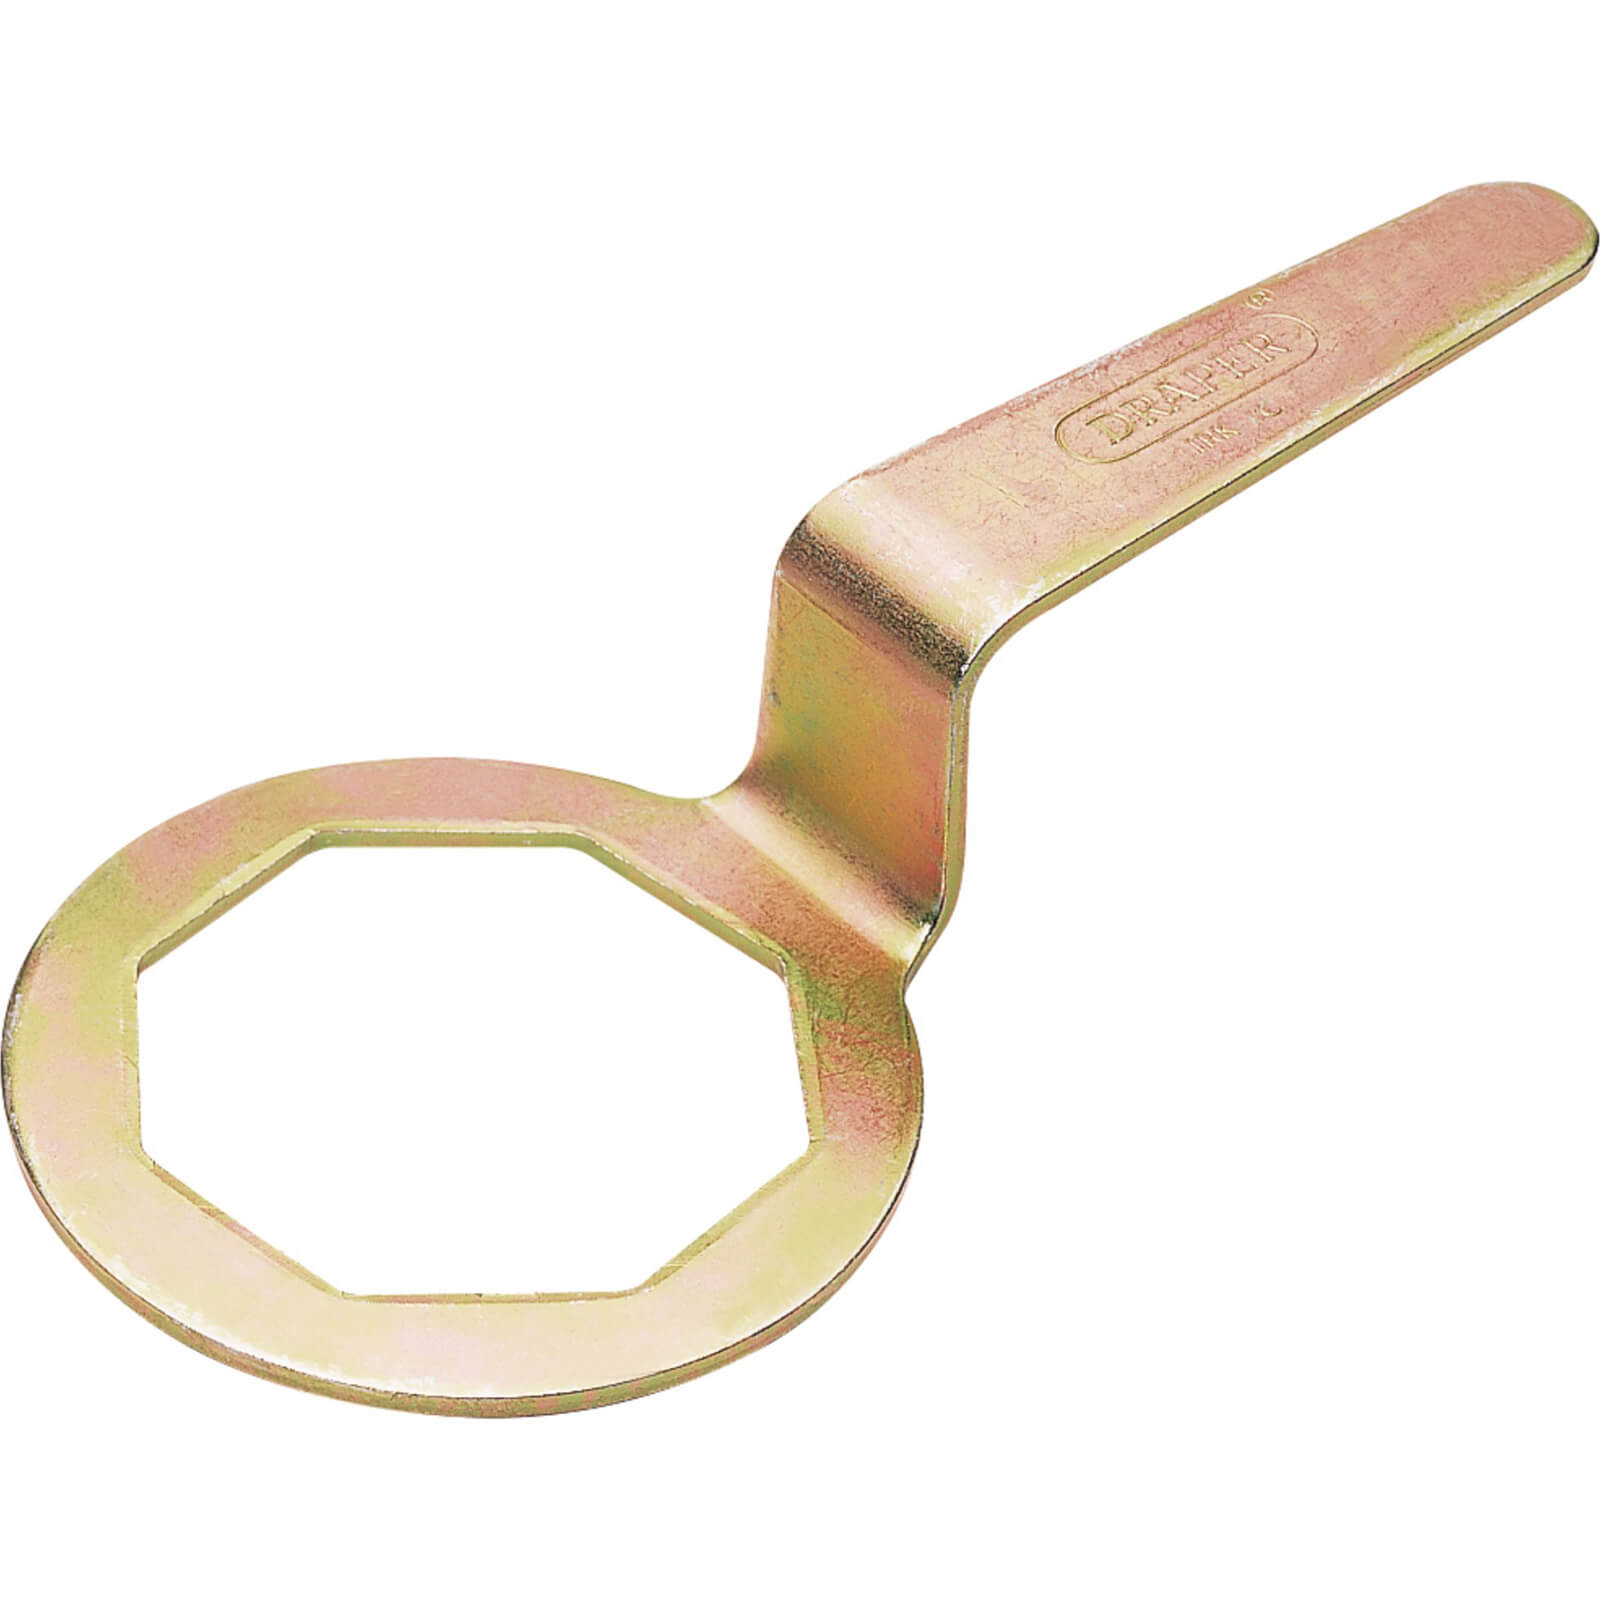 Image of Draper Cranked Immersion Heater Spanner Metric 85mm